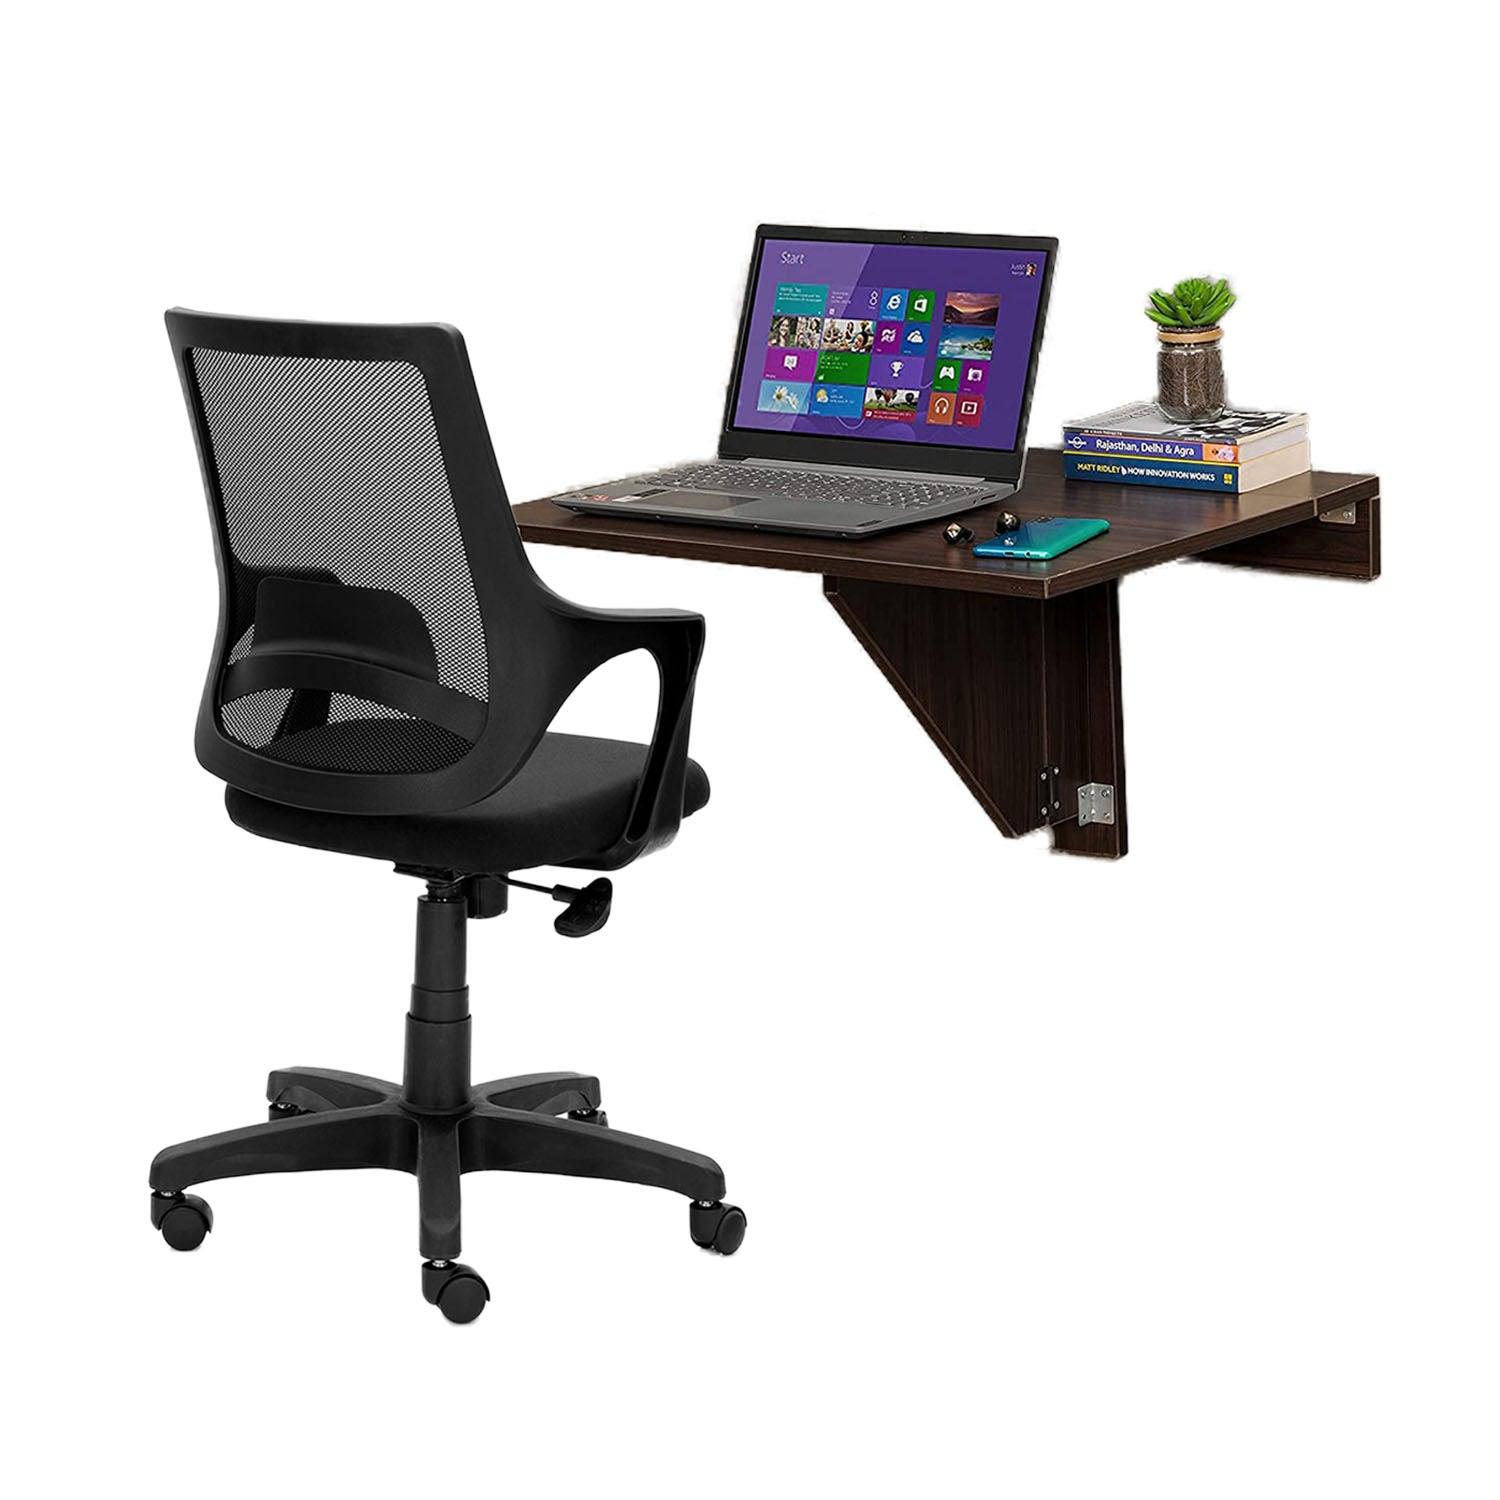 Wall Mounted iDesk with Ledge & Mesh Back Office Chair